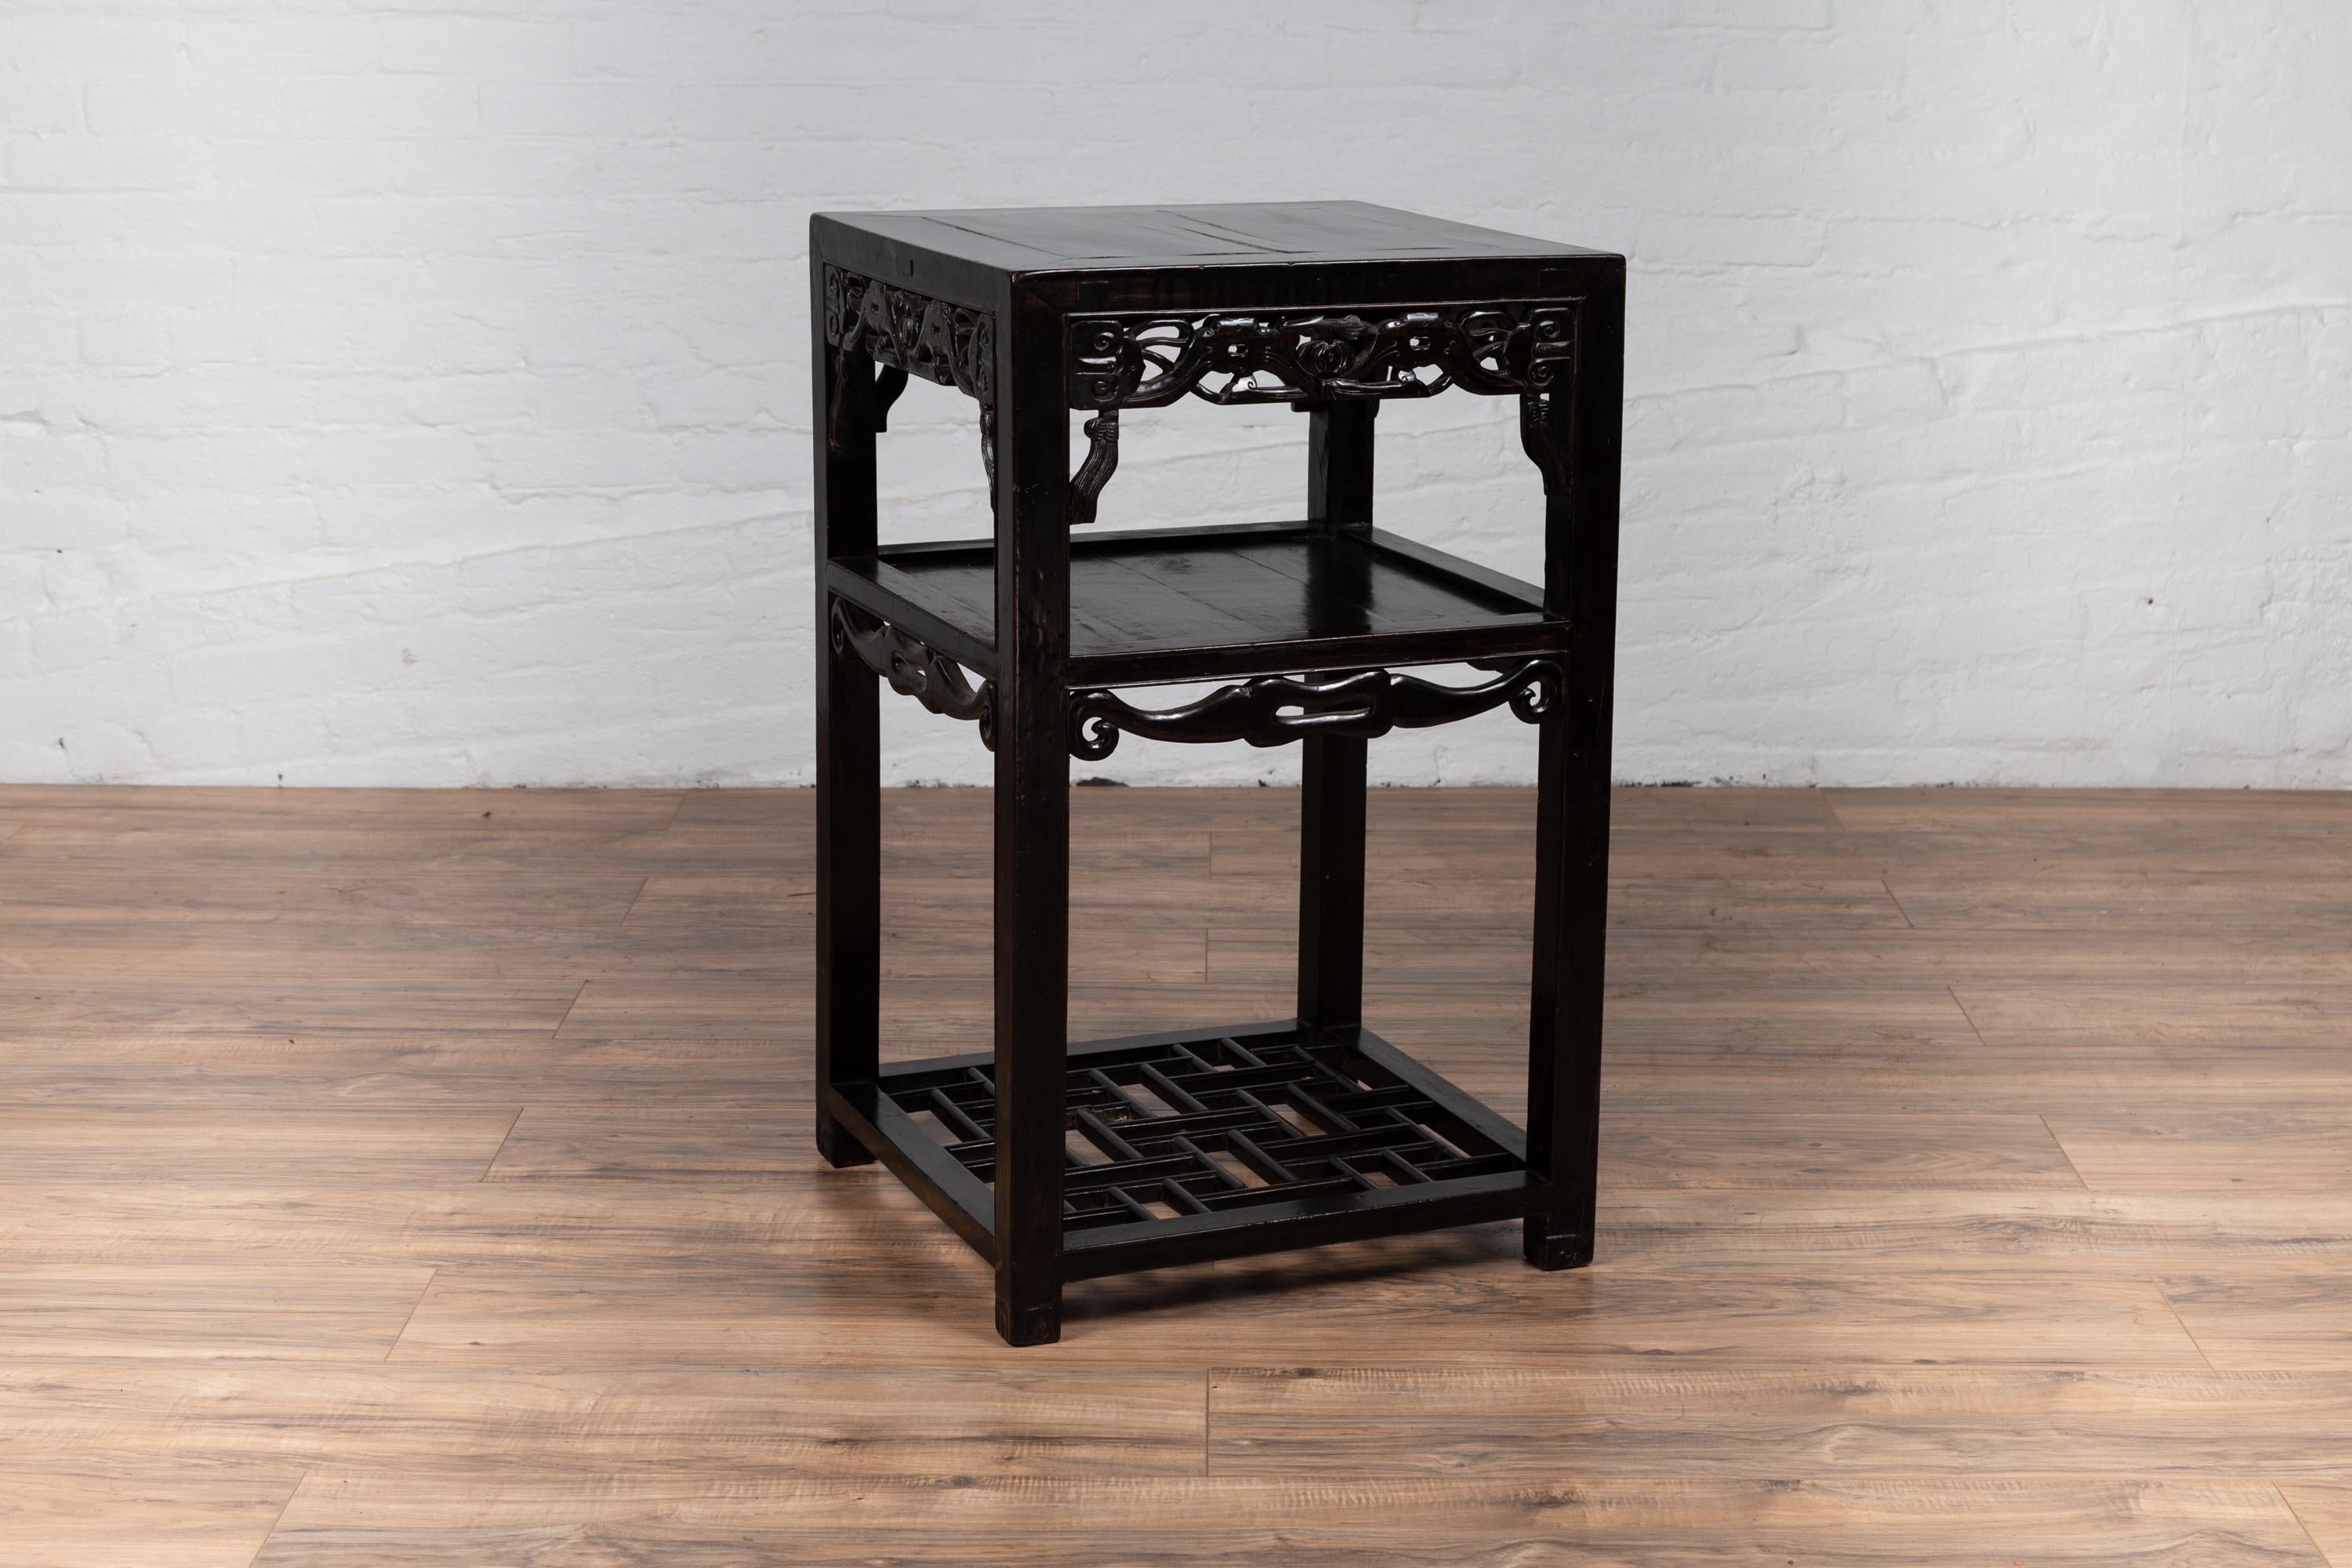 Antique Chinese Lamp Table with Dark Patina, Pierced Apron and Geometric Design 7